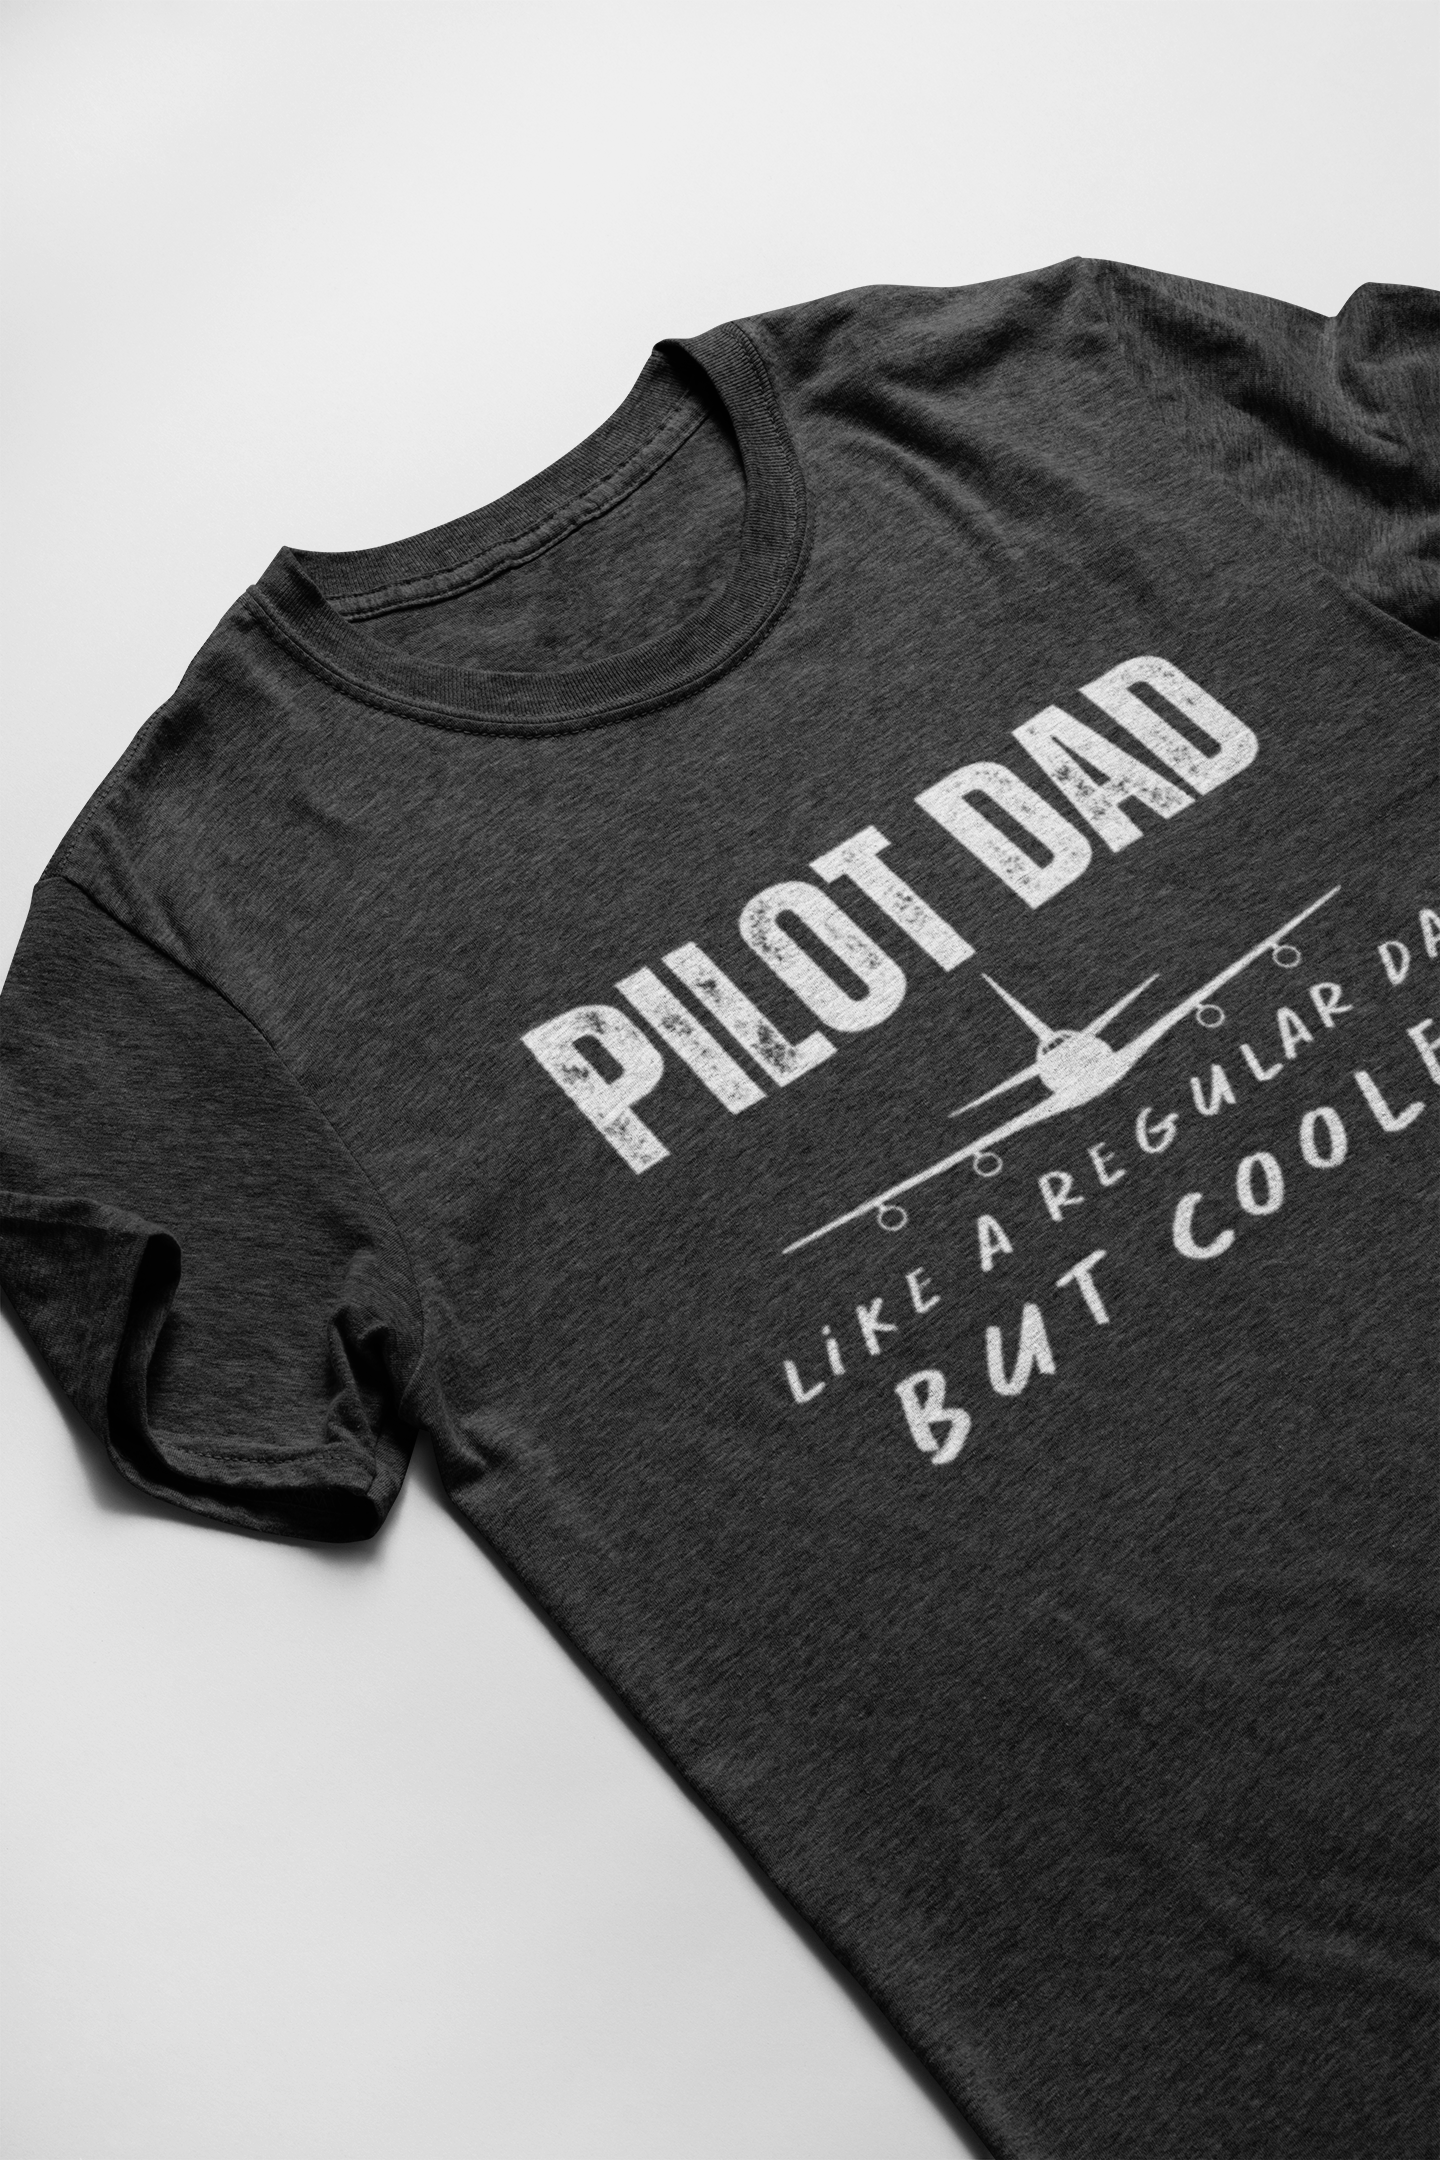 aviation themed tshirt that says pilot dad like a regular dad but cooler